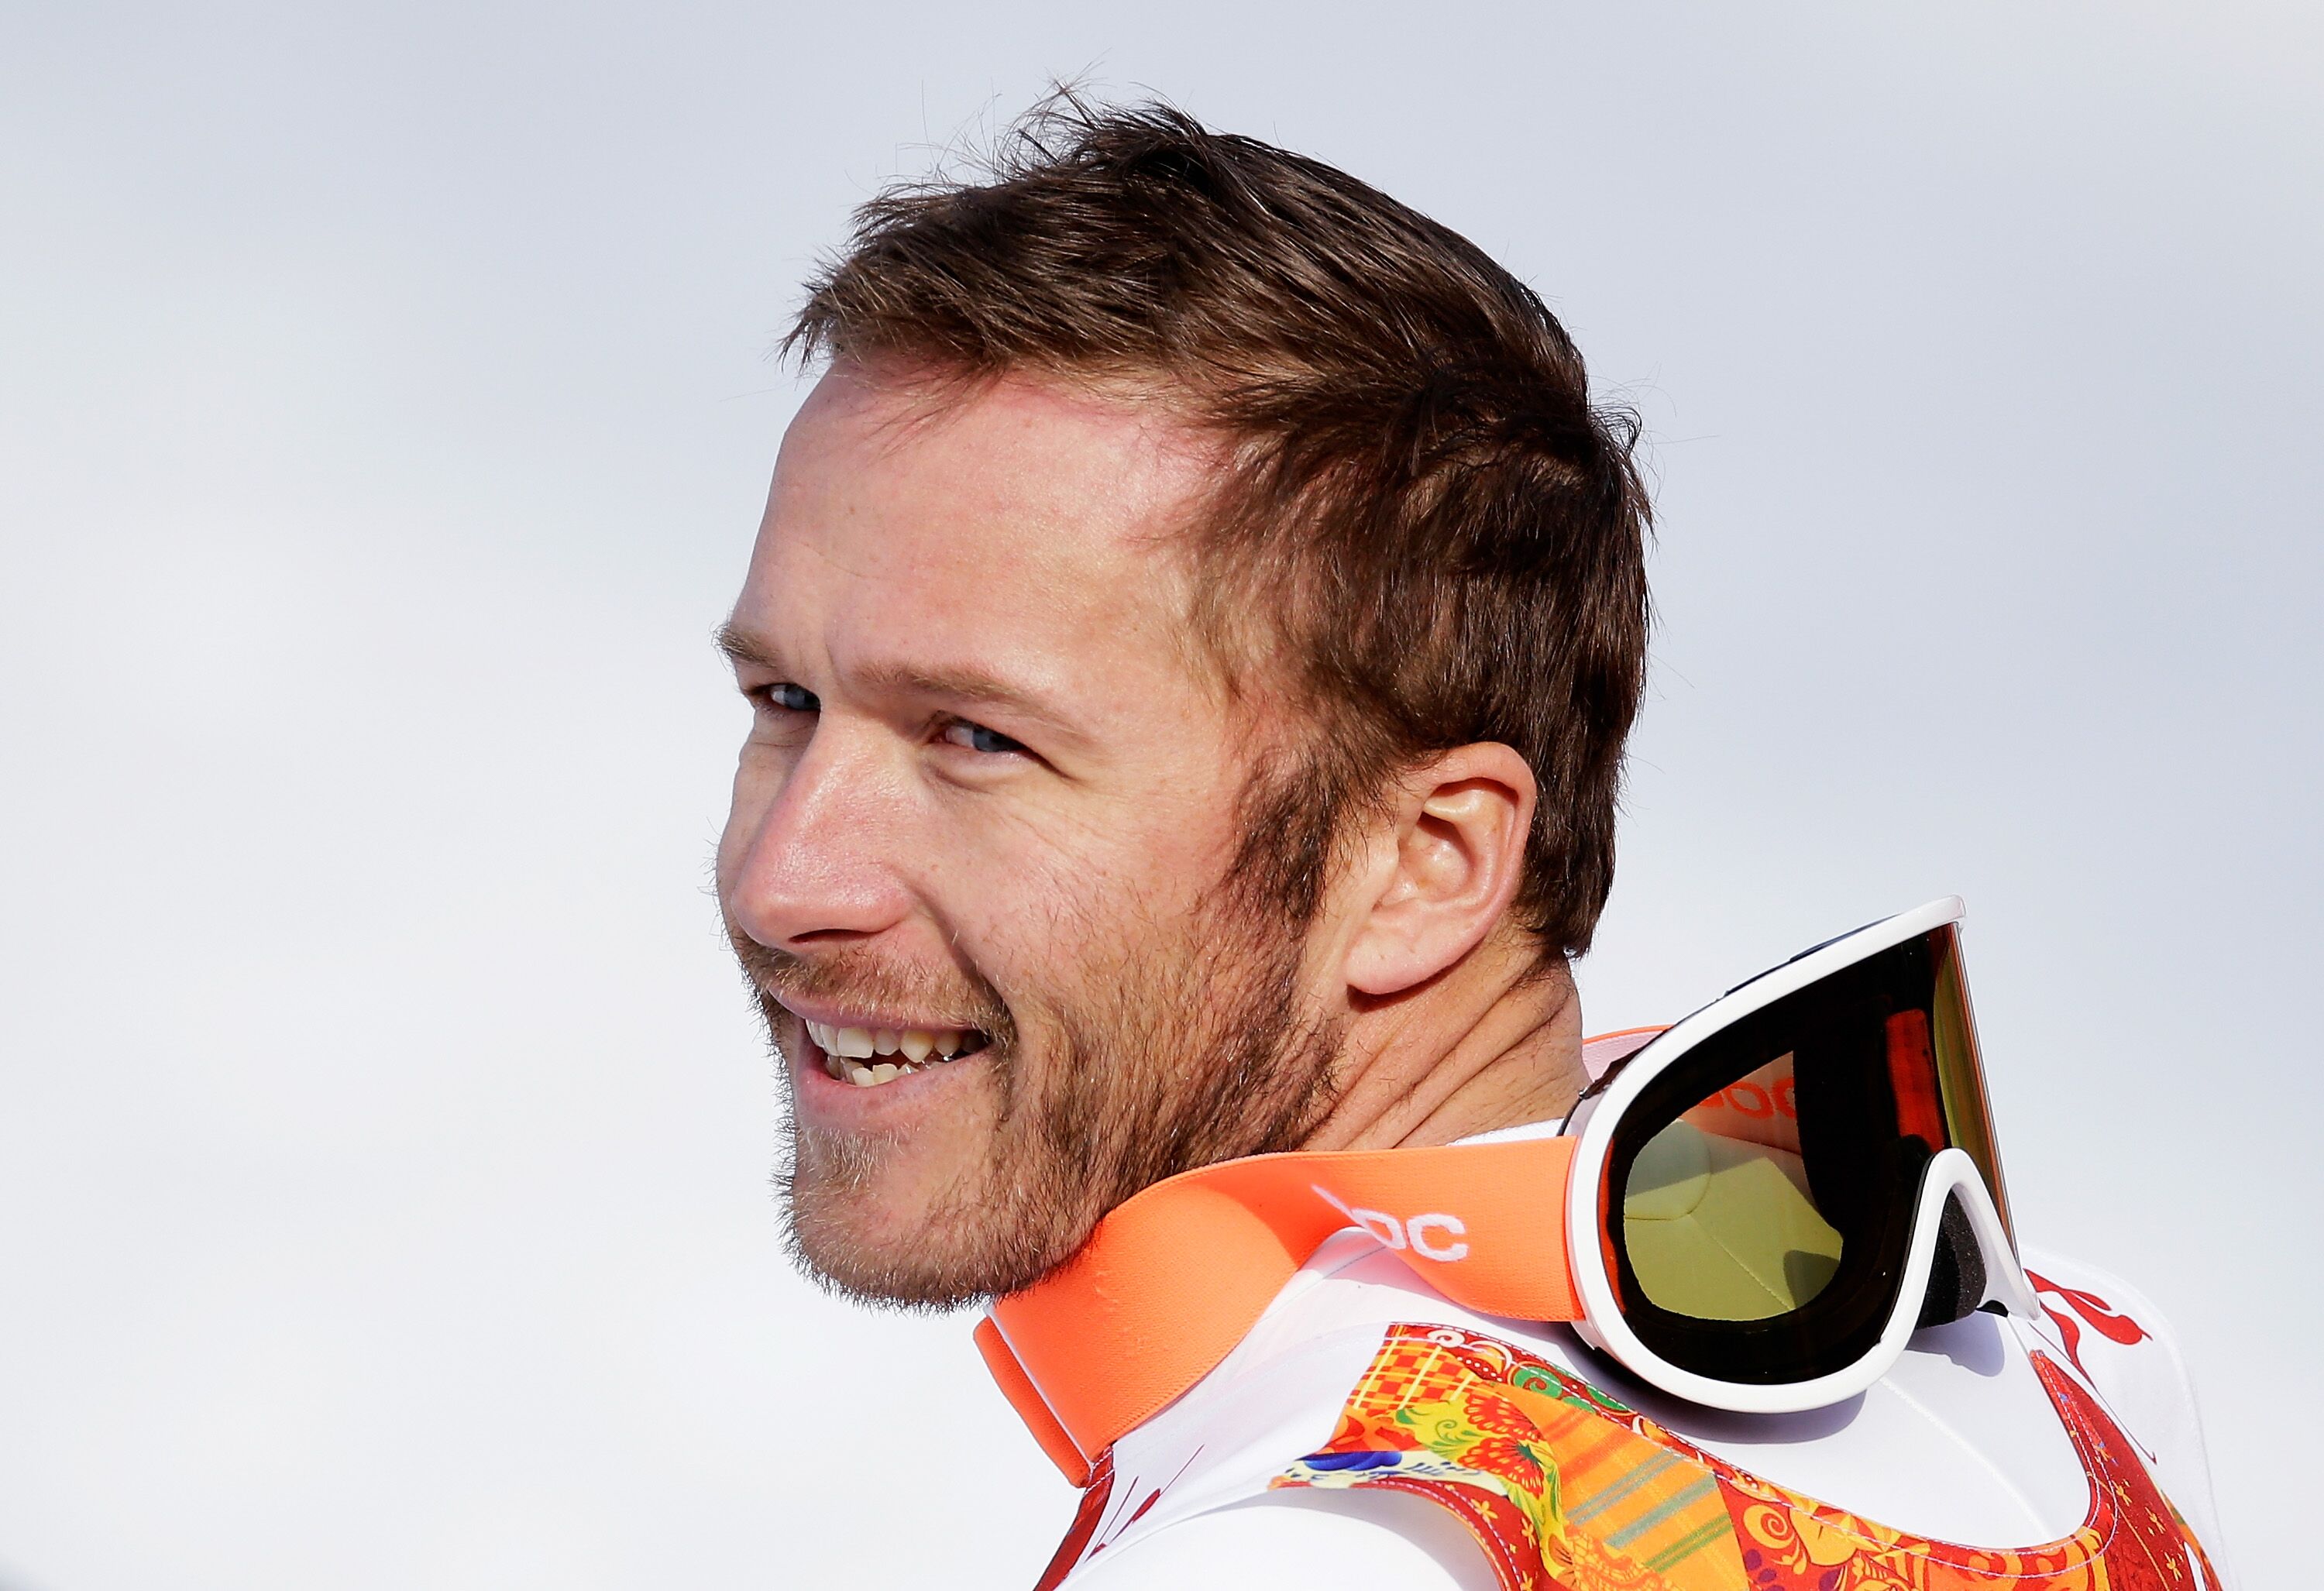 Bode Miller at the Sochi Winter Olympics on February 16, 2014, in Russia | Photo: Ezra Shaw/Getty Images